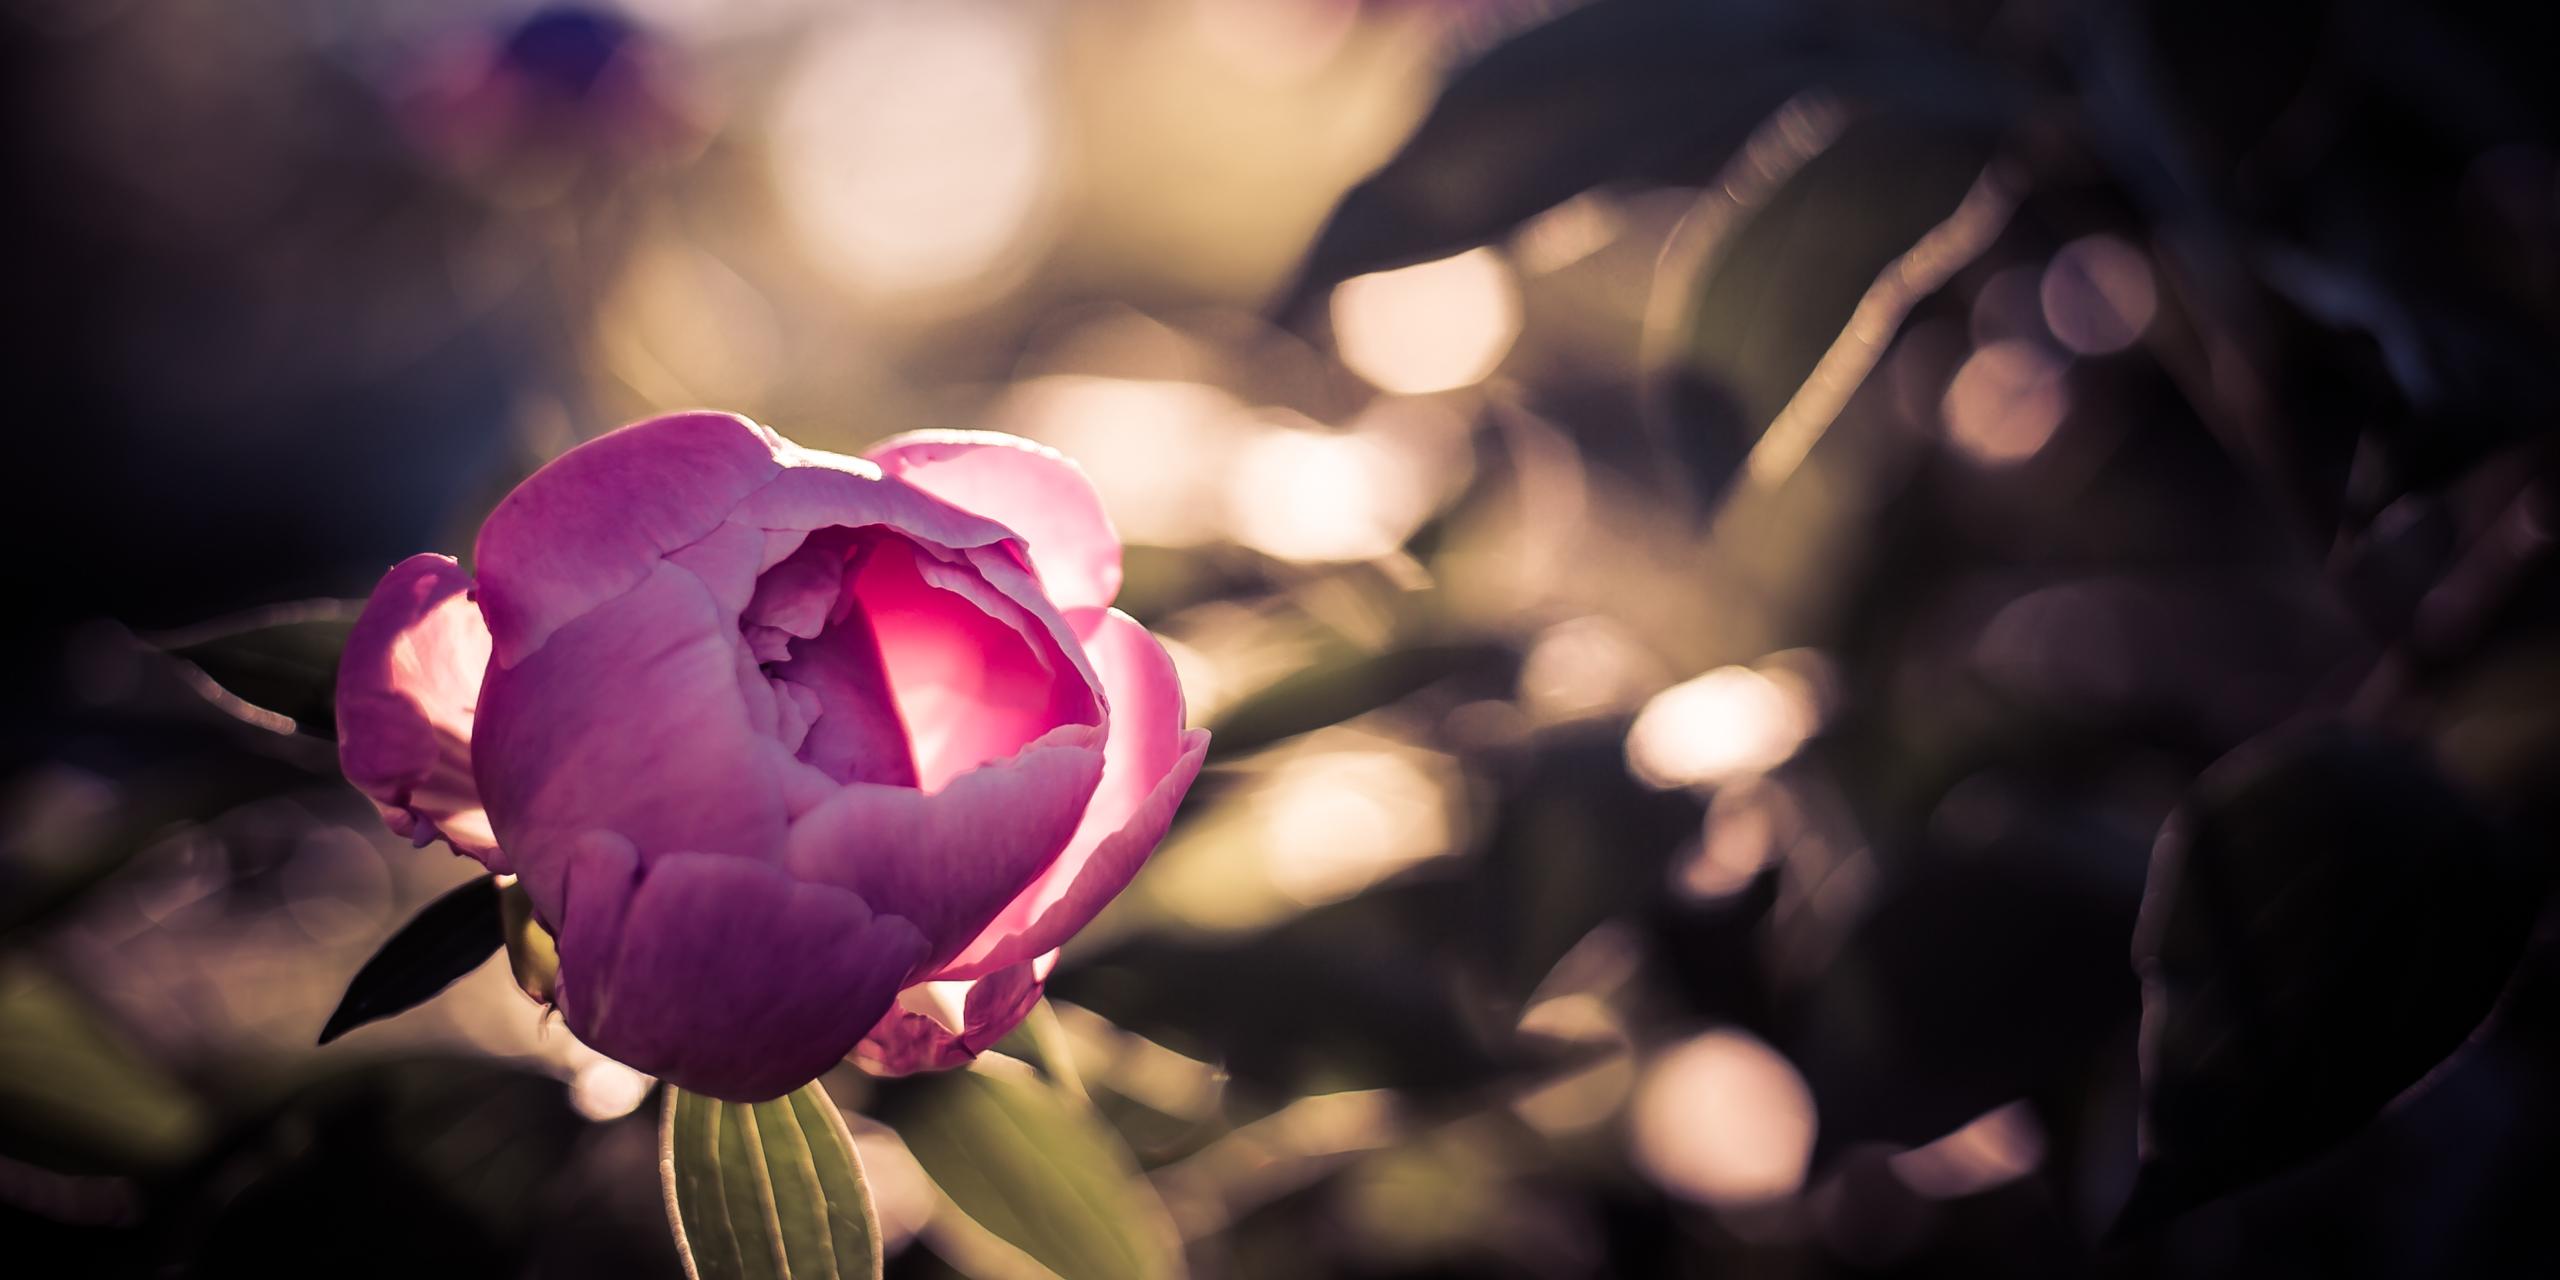 Can a peony bring one peace? — Greg Molyneux Photography